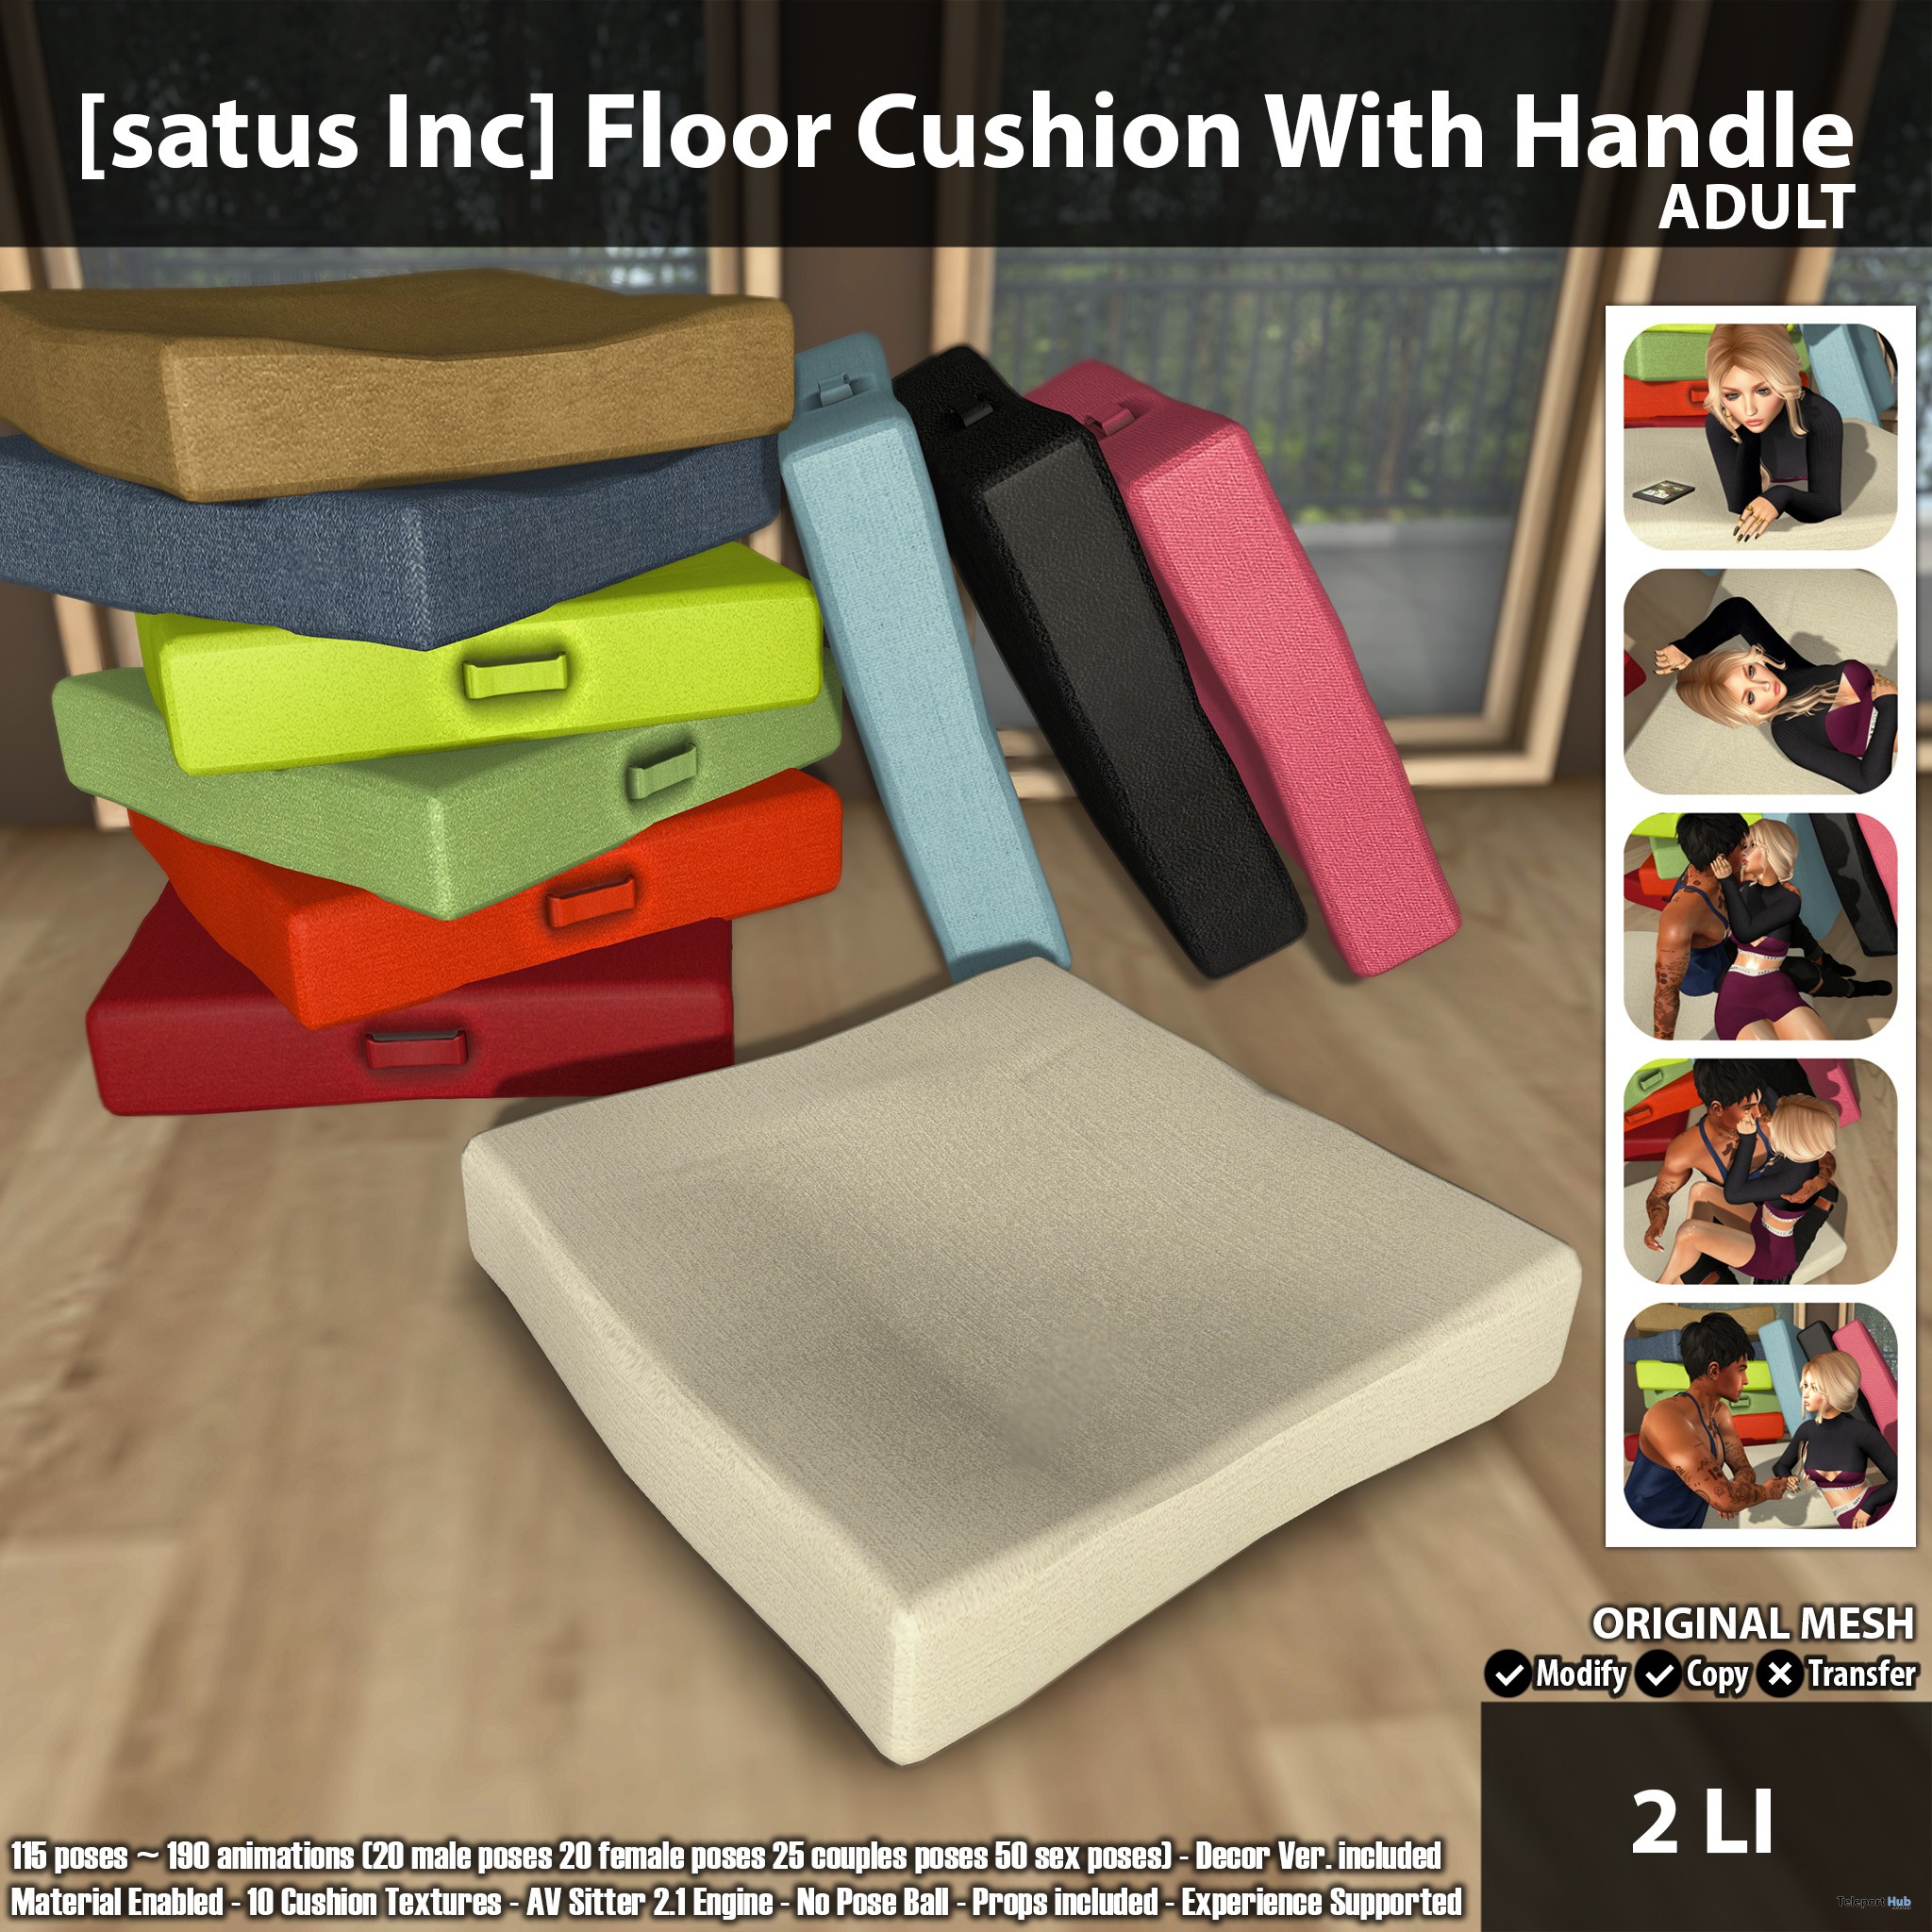 New Release: Floor Cushion With Handle Adult & PG by [satus Inc] - Teleport Hub - teleporthub.com